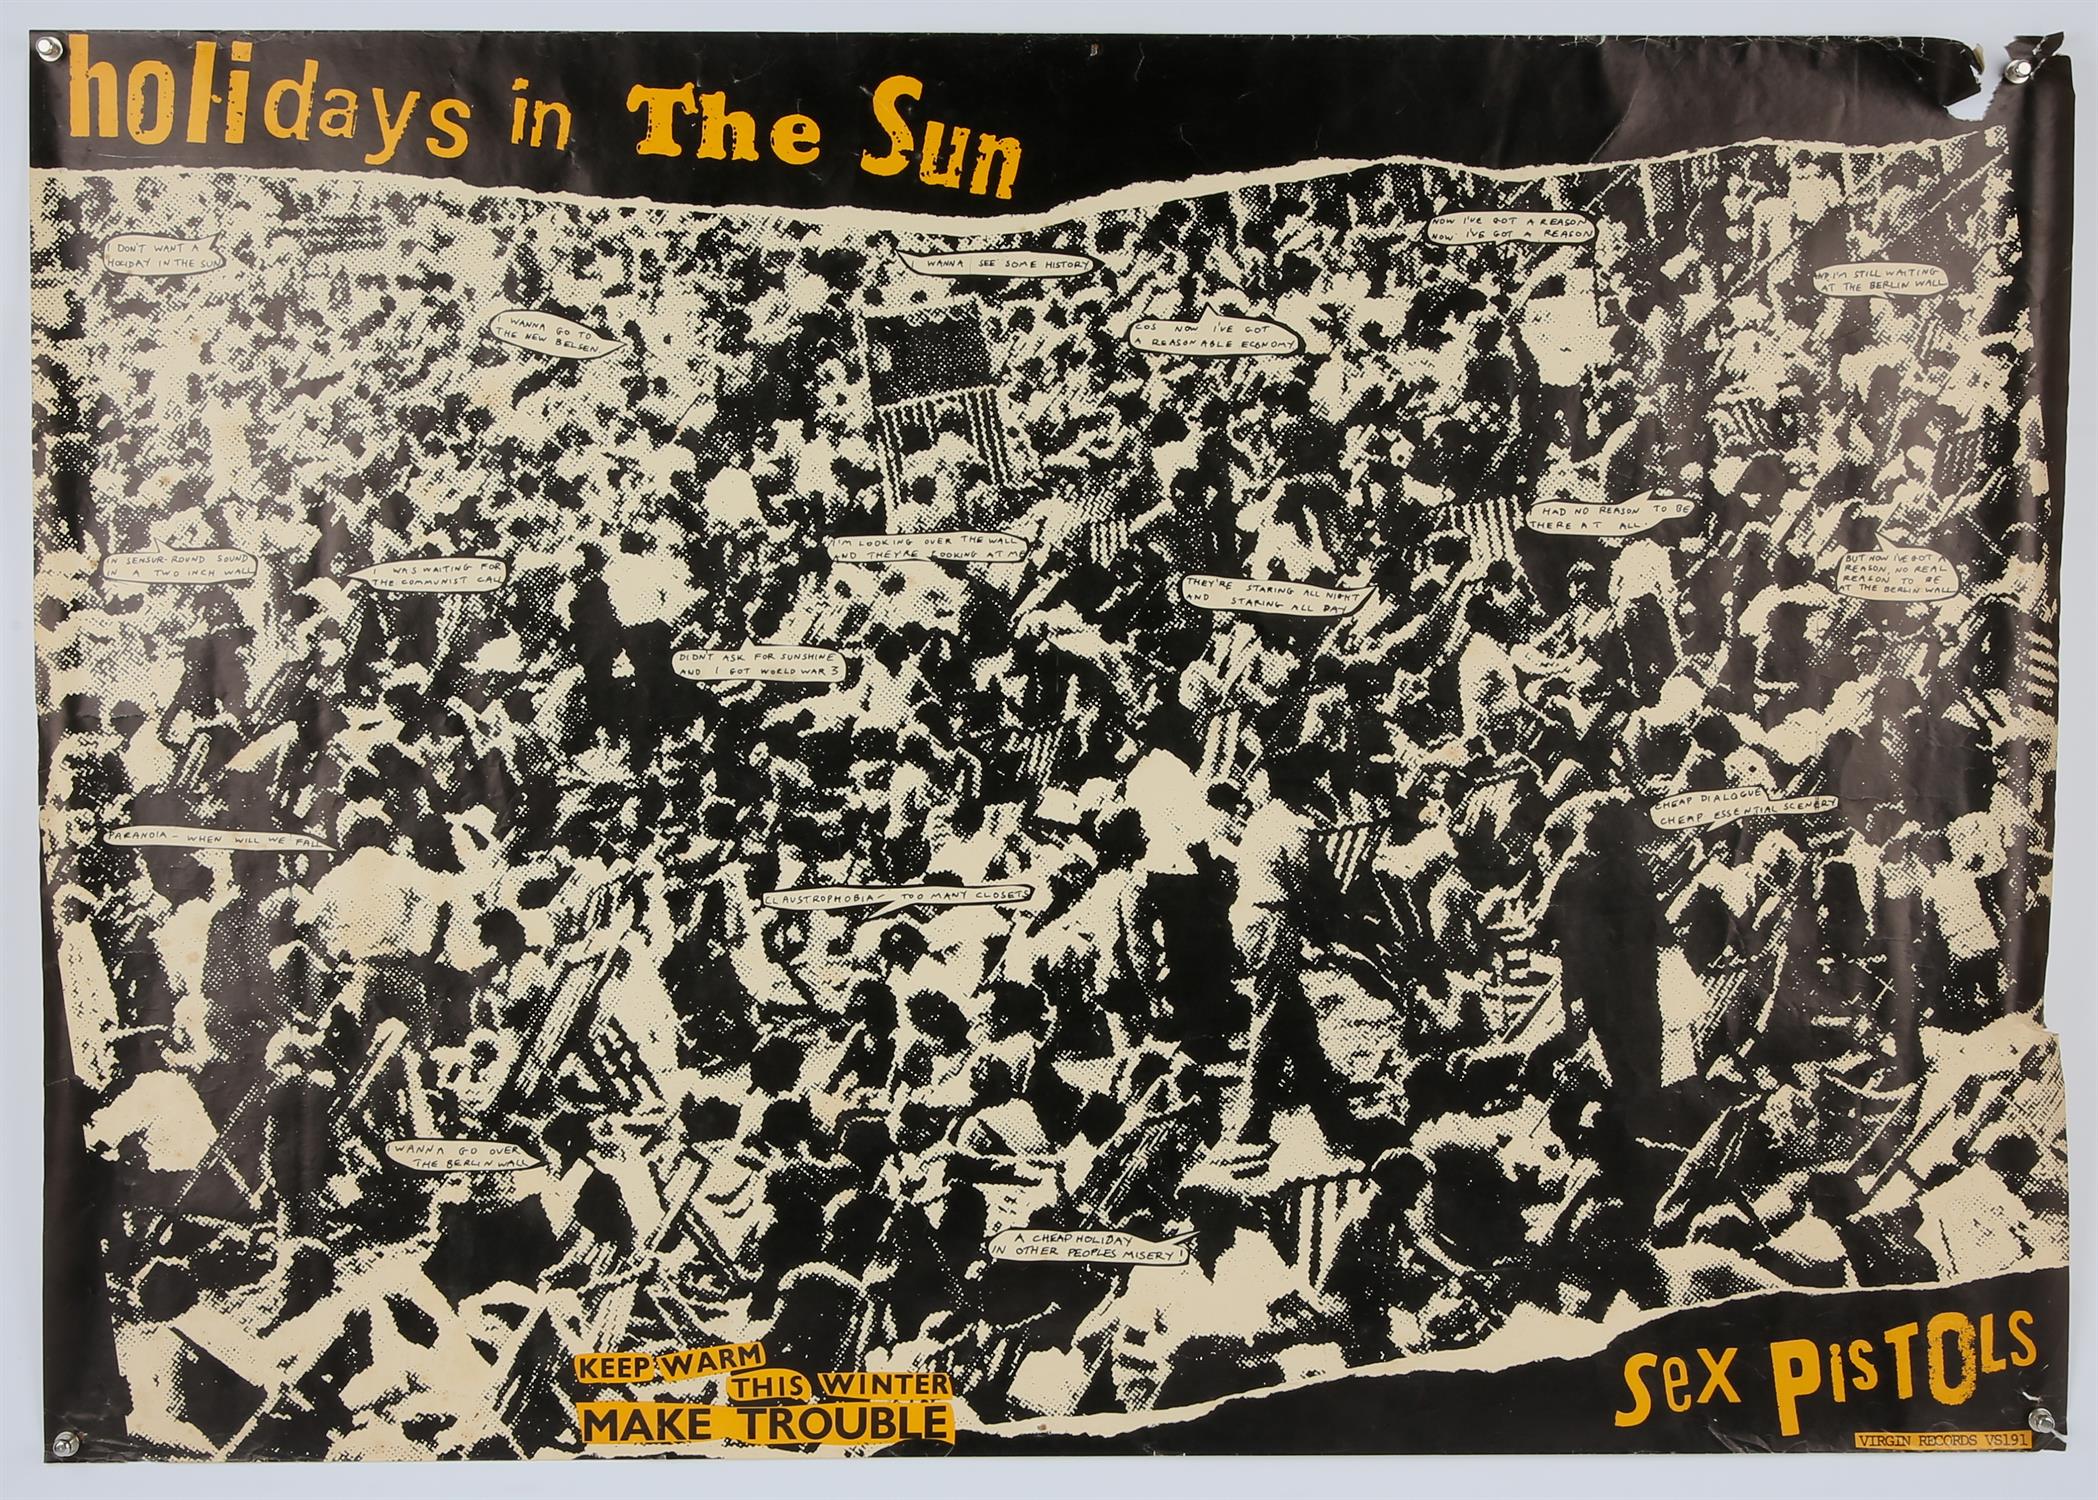 The Sex Pistols Holidays In The Sun (1977), UK, Virgin Records label VS191, 39.5 x 27.5 inches,